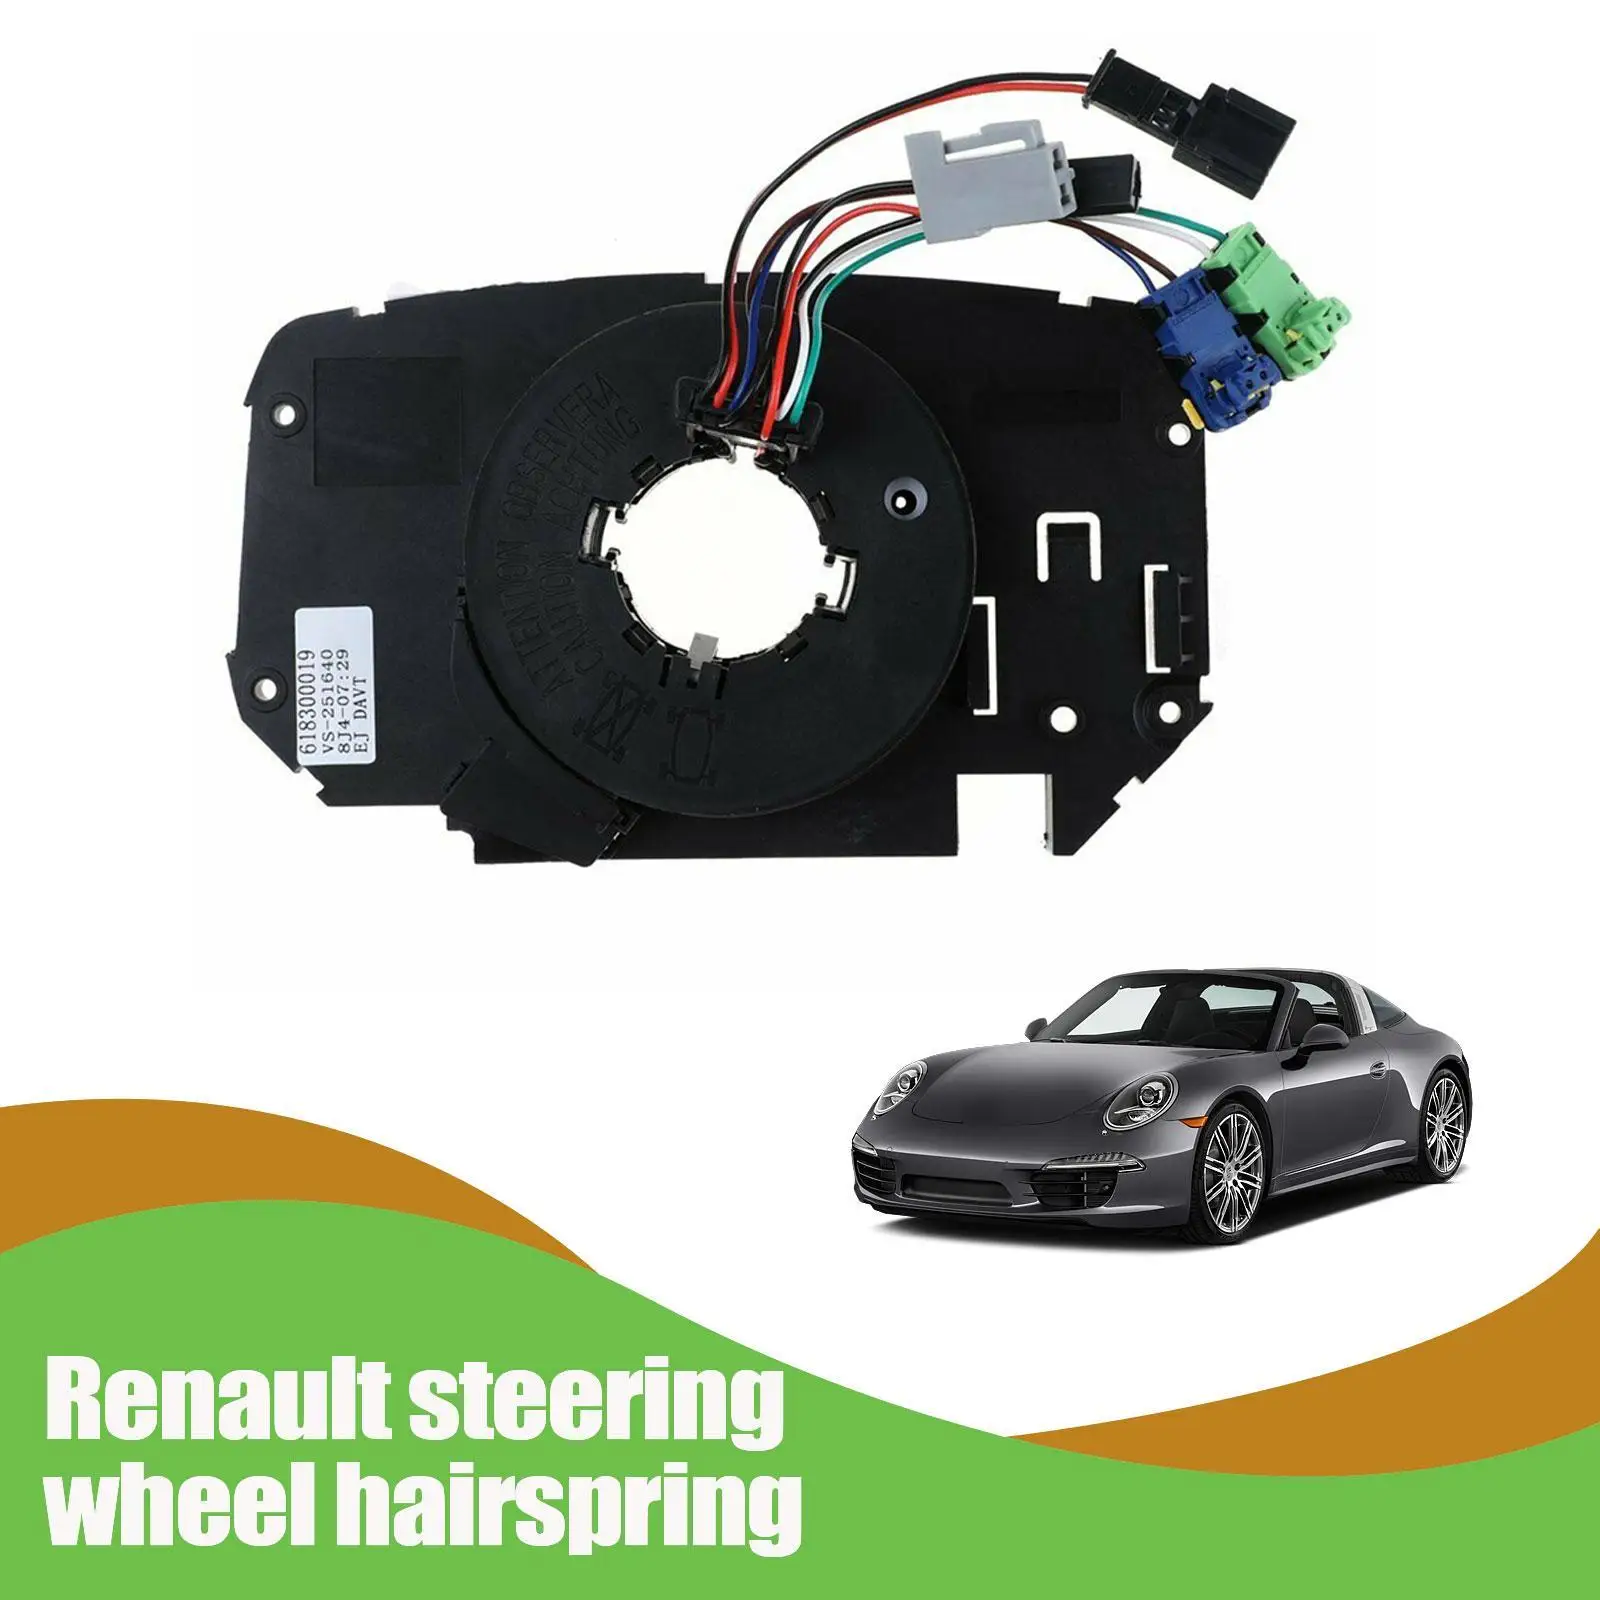 

HIGH QUALITY Replacement Repair Wire Cable For Renault Megane II 3 5 PORTES ,MK II 8200216462 8200216454 8200216459